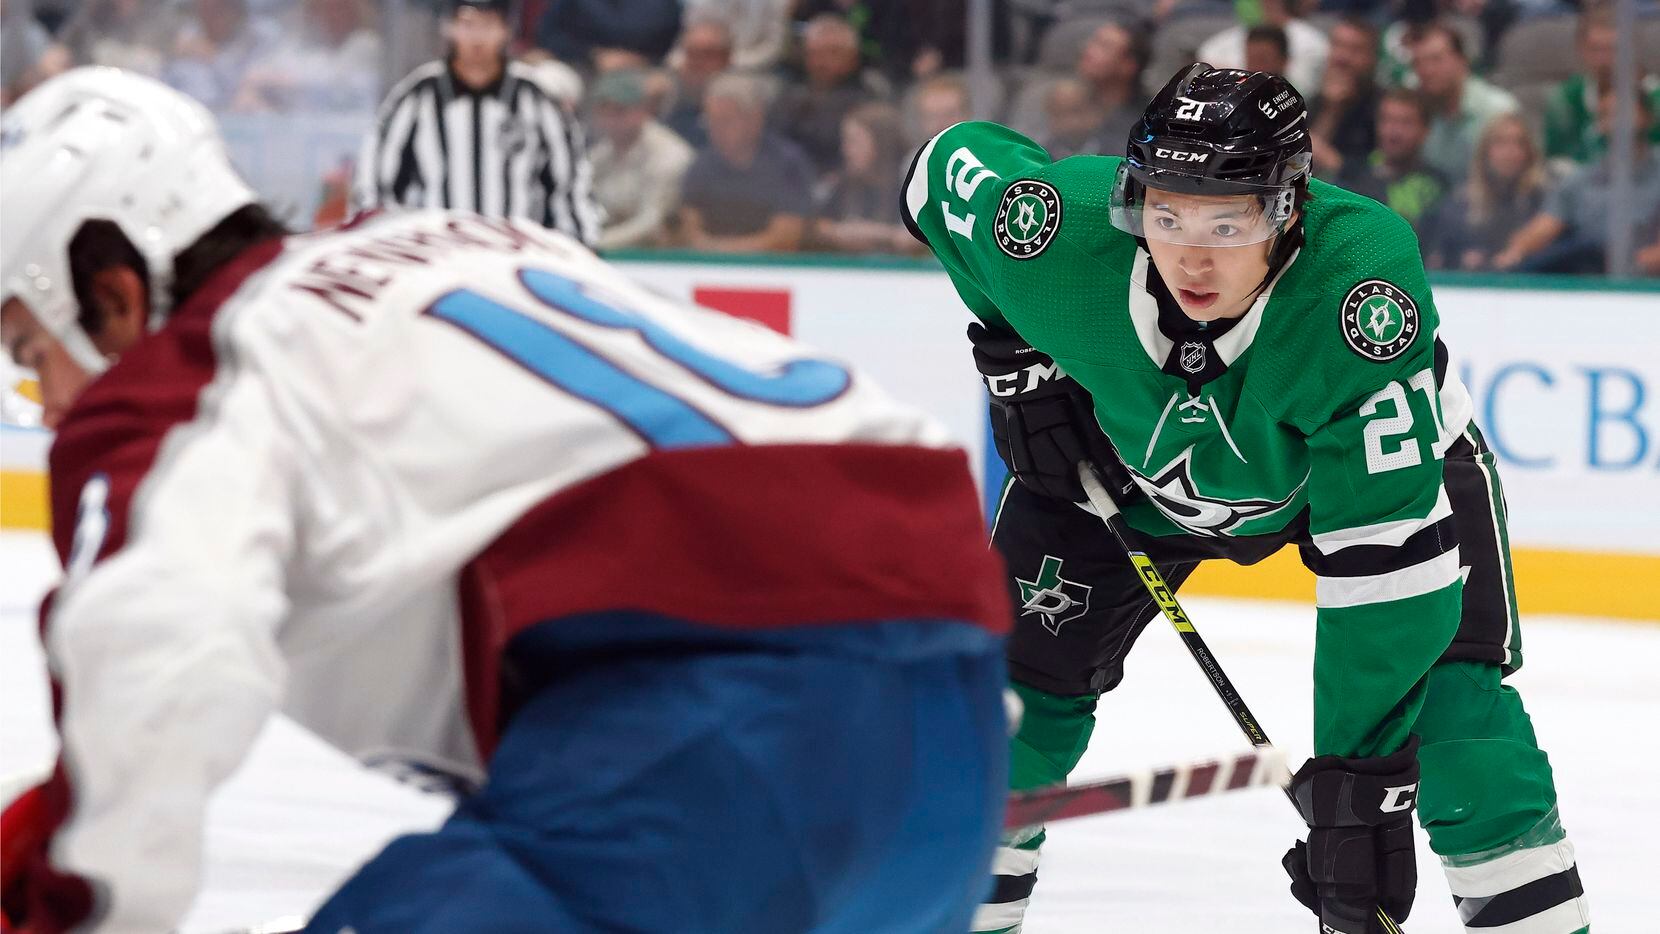 Dallas Stars left wing Jason Robertson (21) gets ready for a face off against the Colorado Avalanche in the first period at the American Airlines Center in Dallas, Thursday, October 7, 2021.